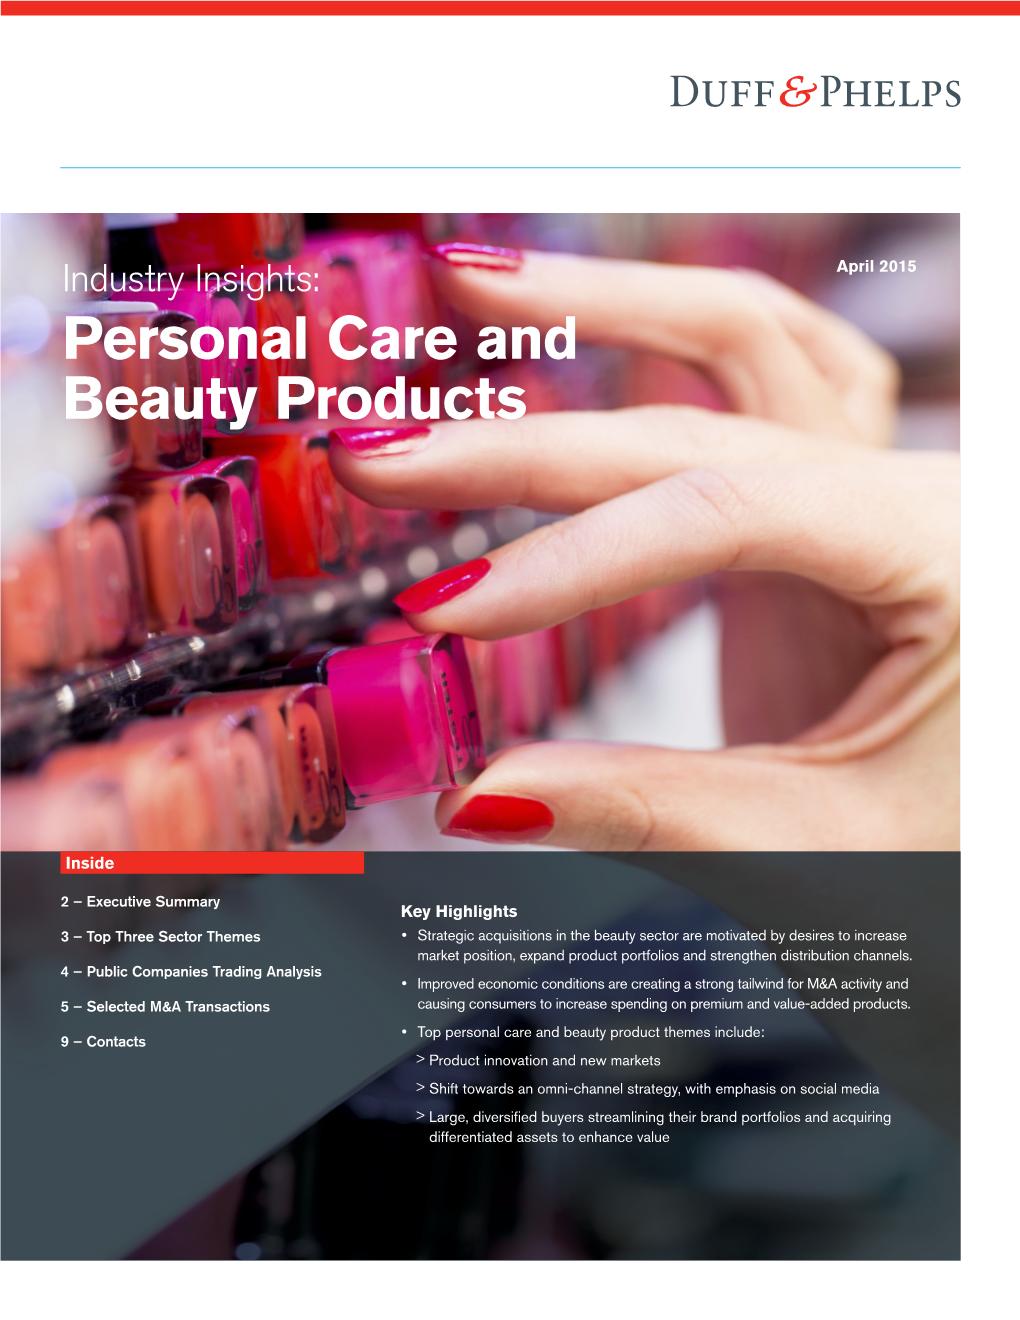 Personal Care and Beauty Products Industry Insights – April 2015